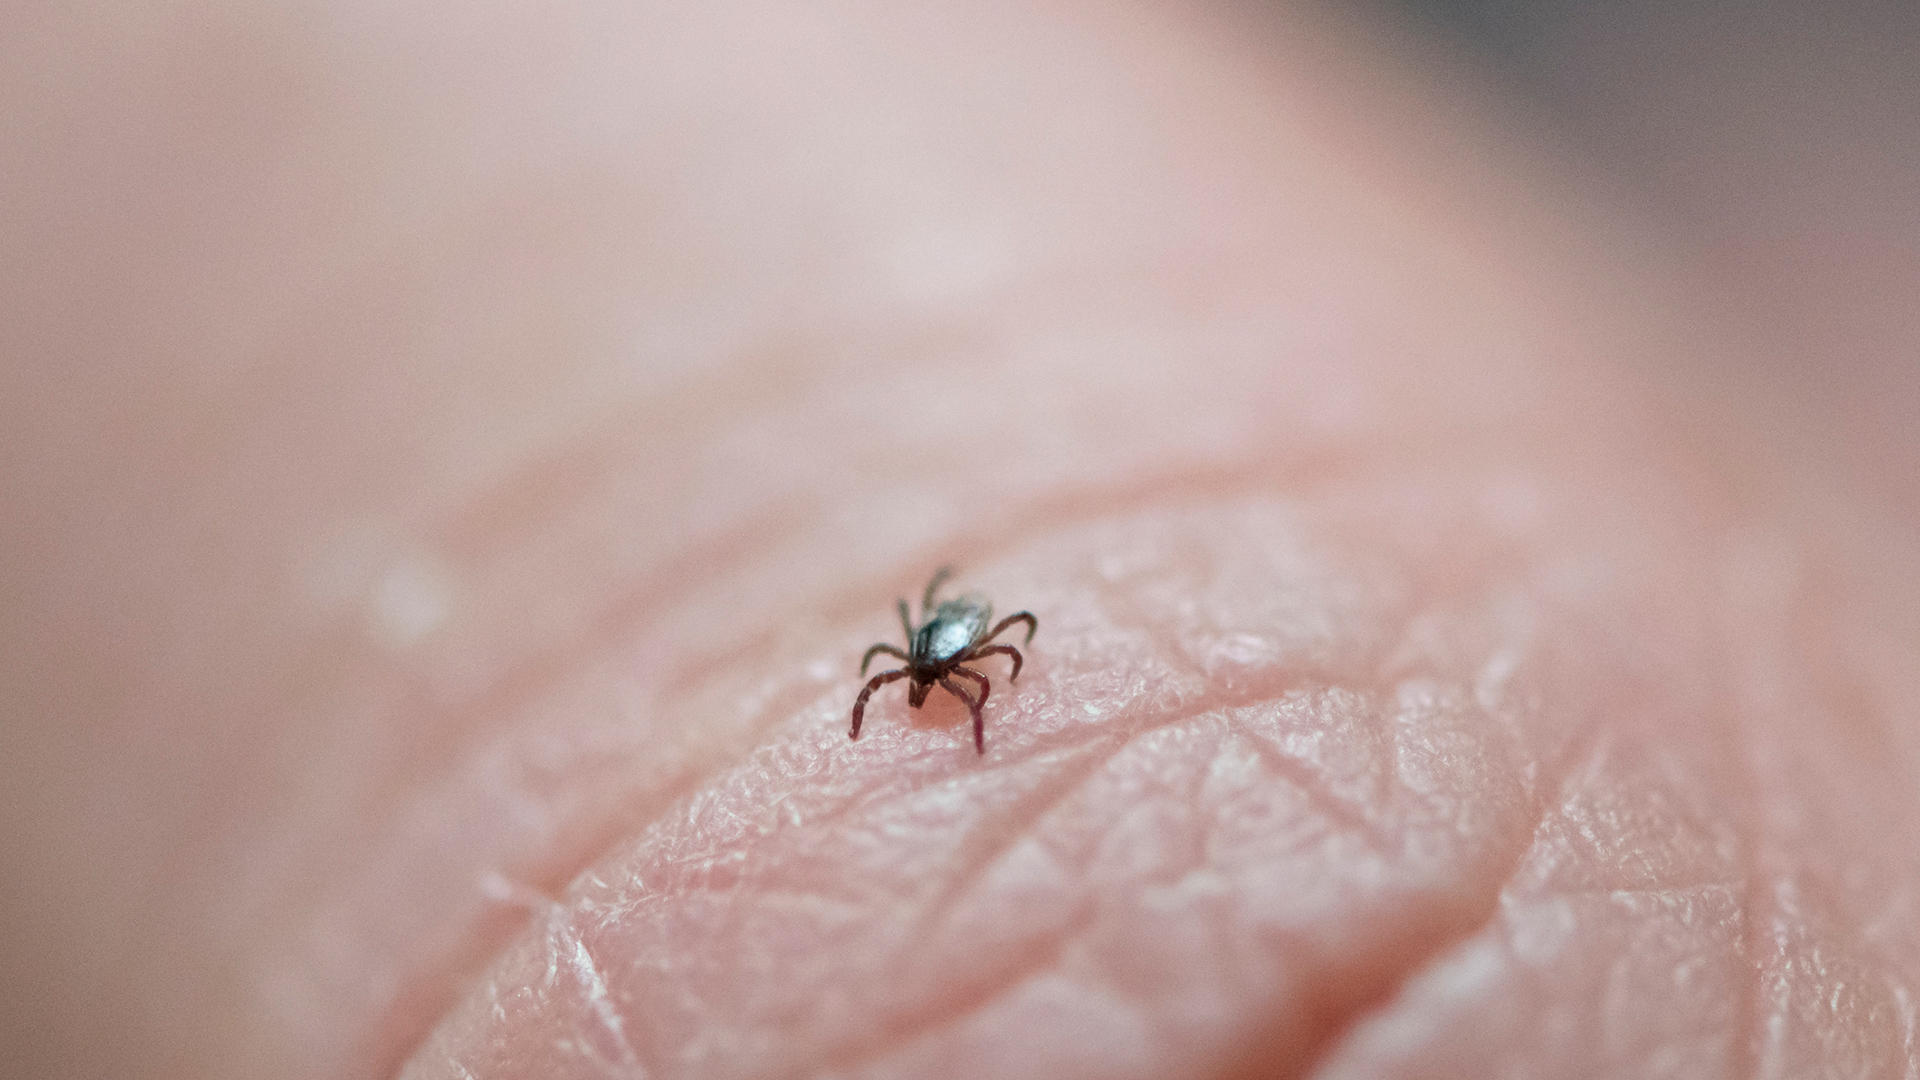 New study shows Lyme disease alters immune system